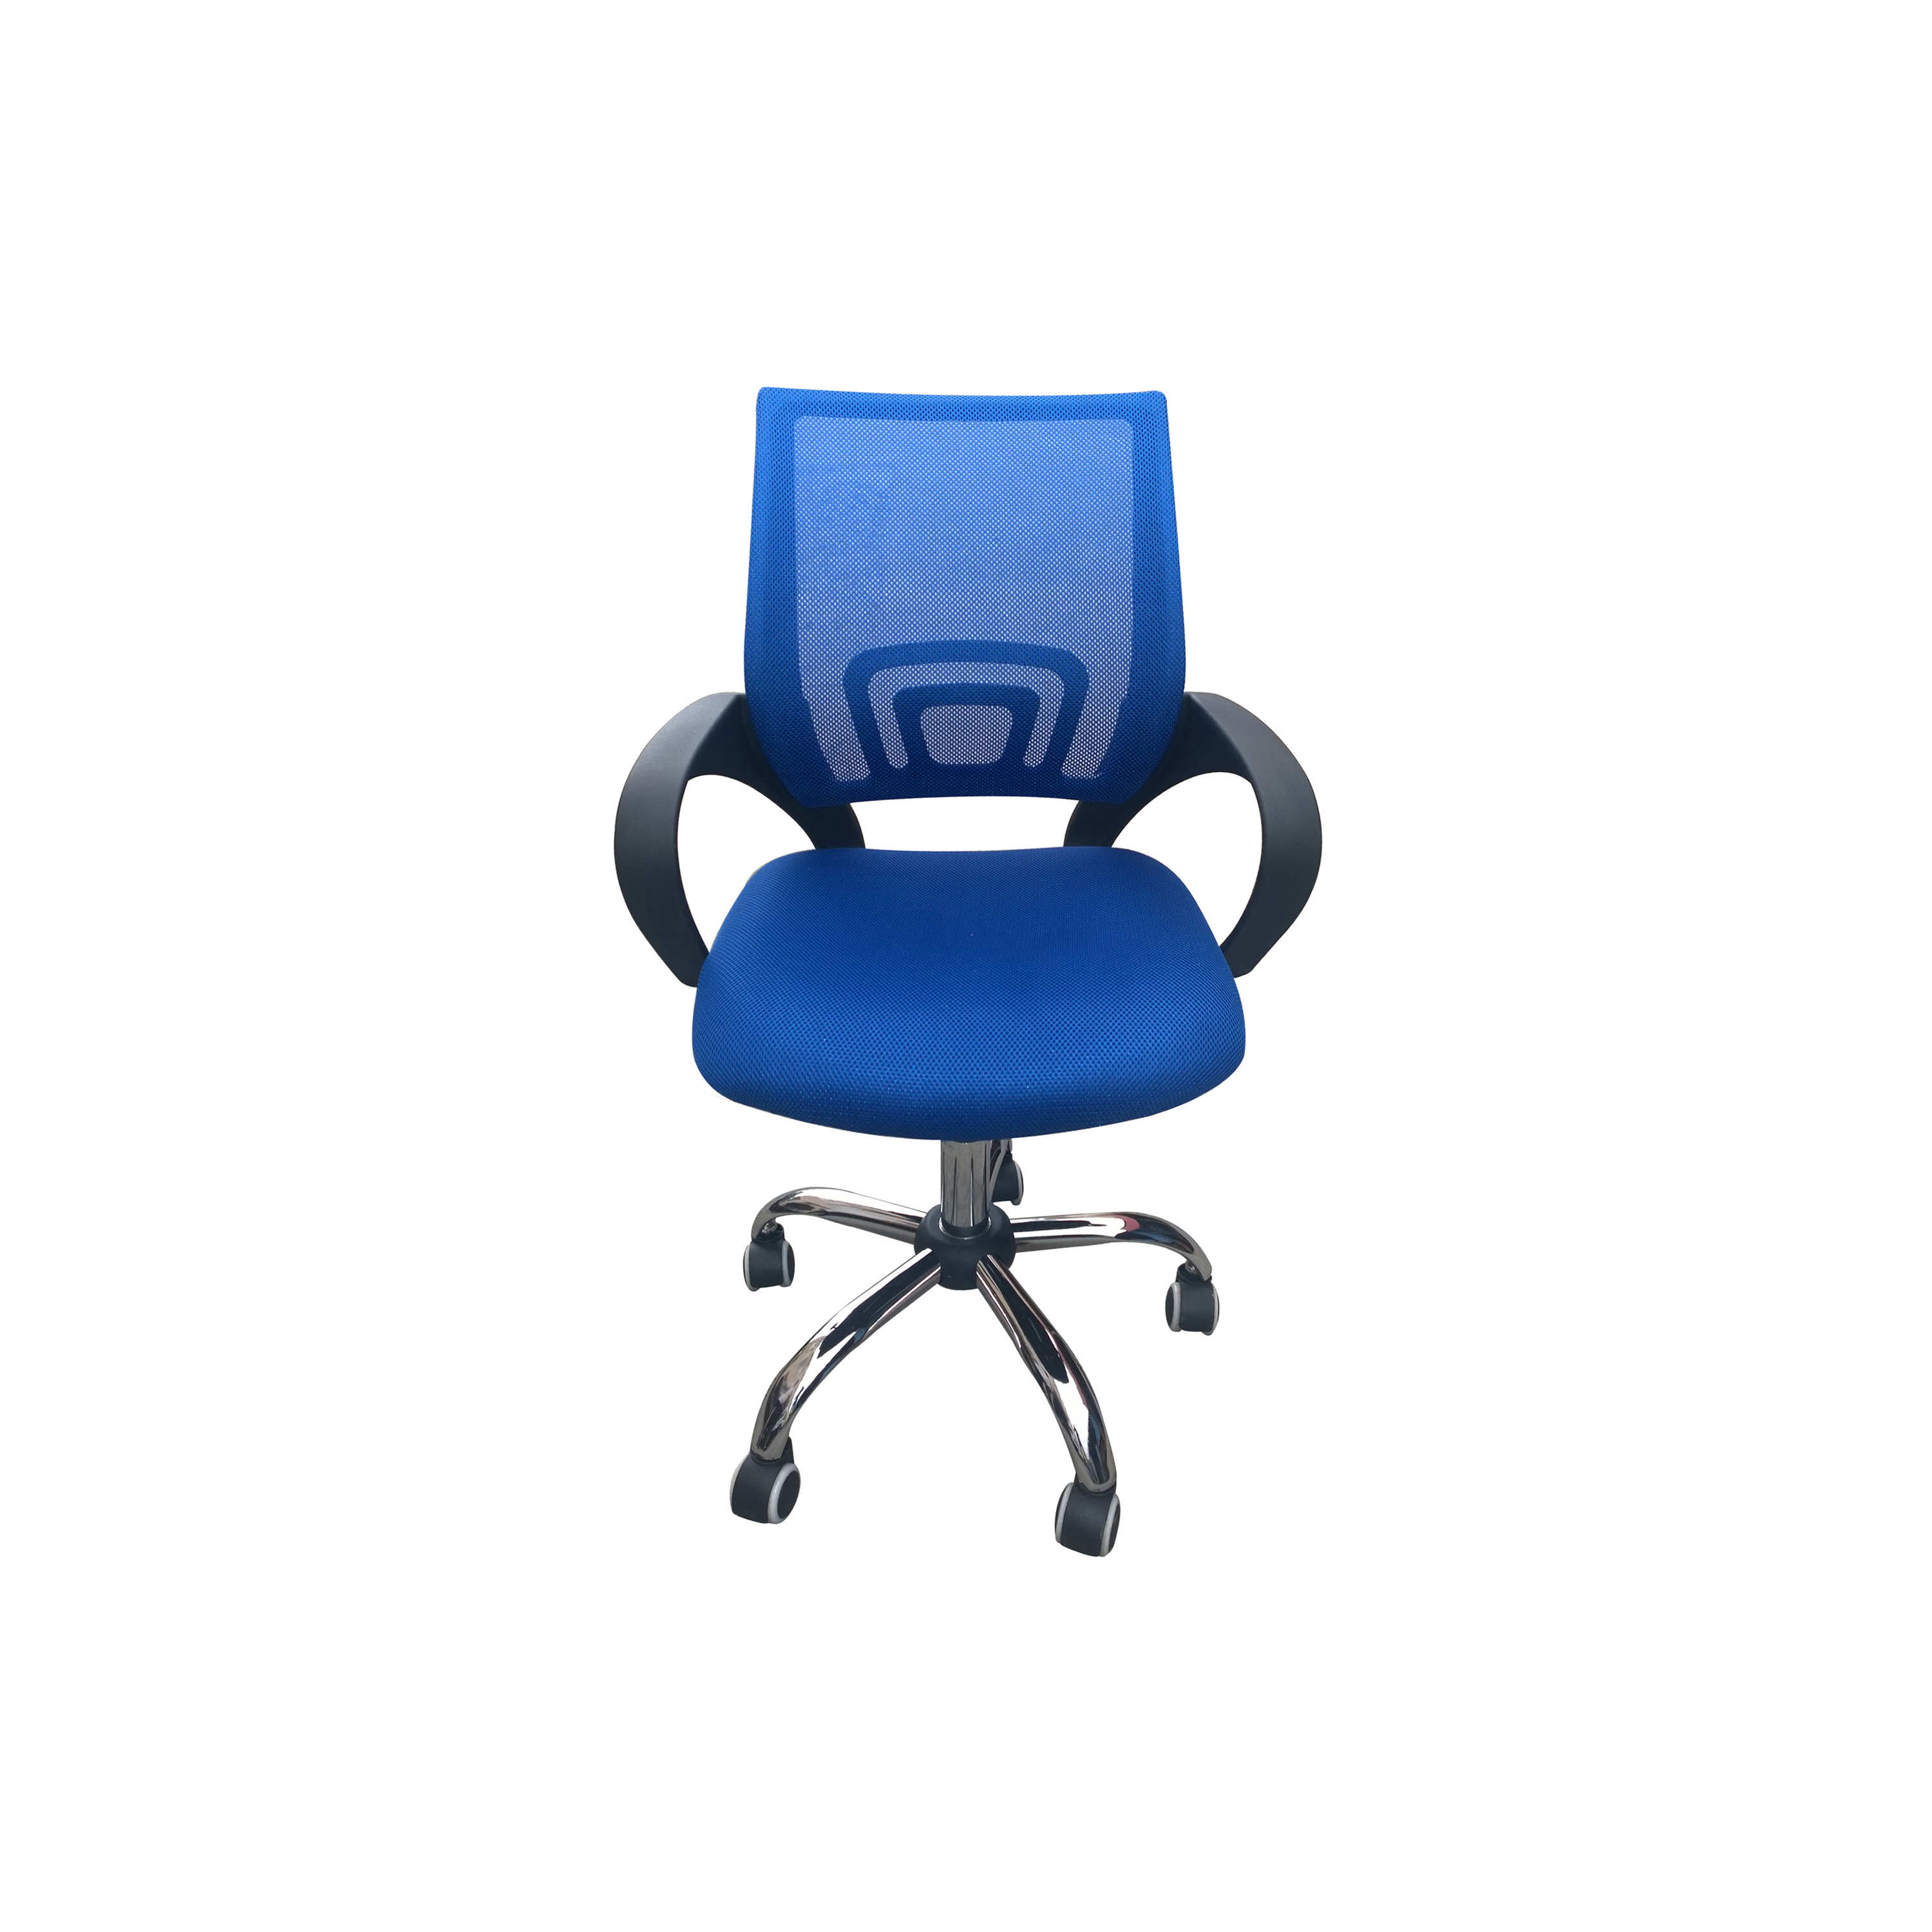 LPD Tate Mesh Back Office Chair Blue - image 1